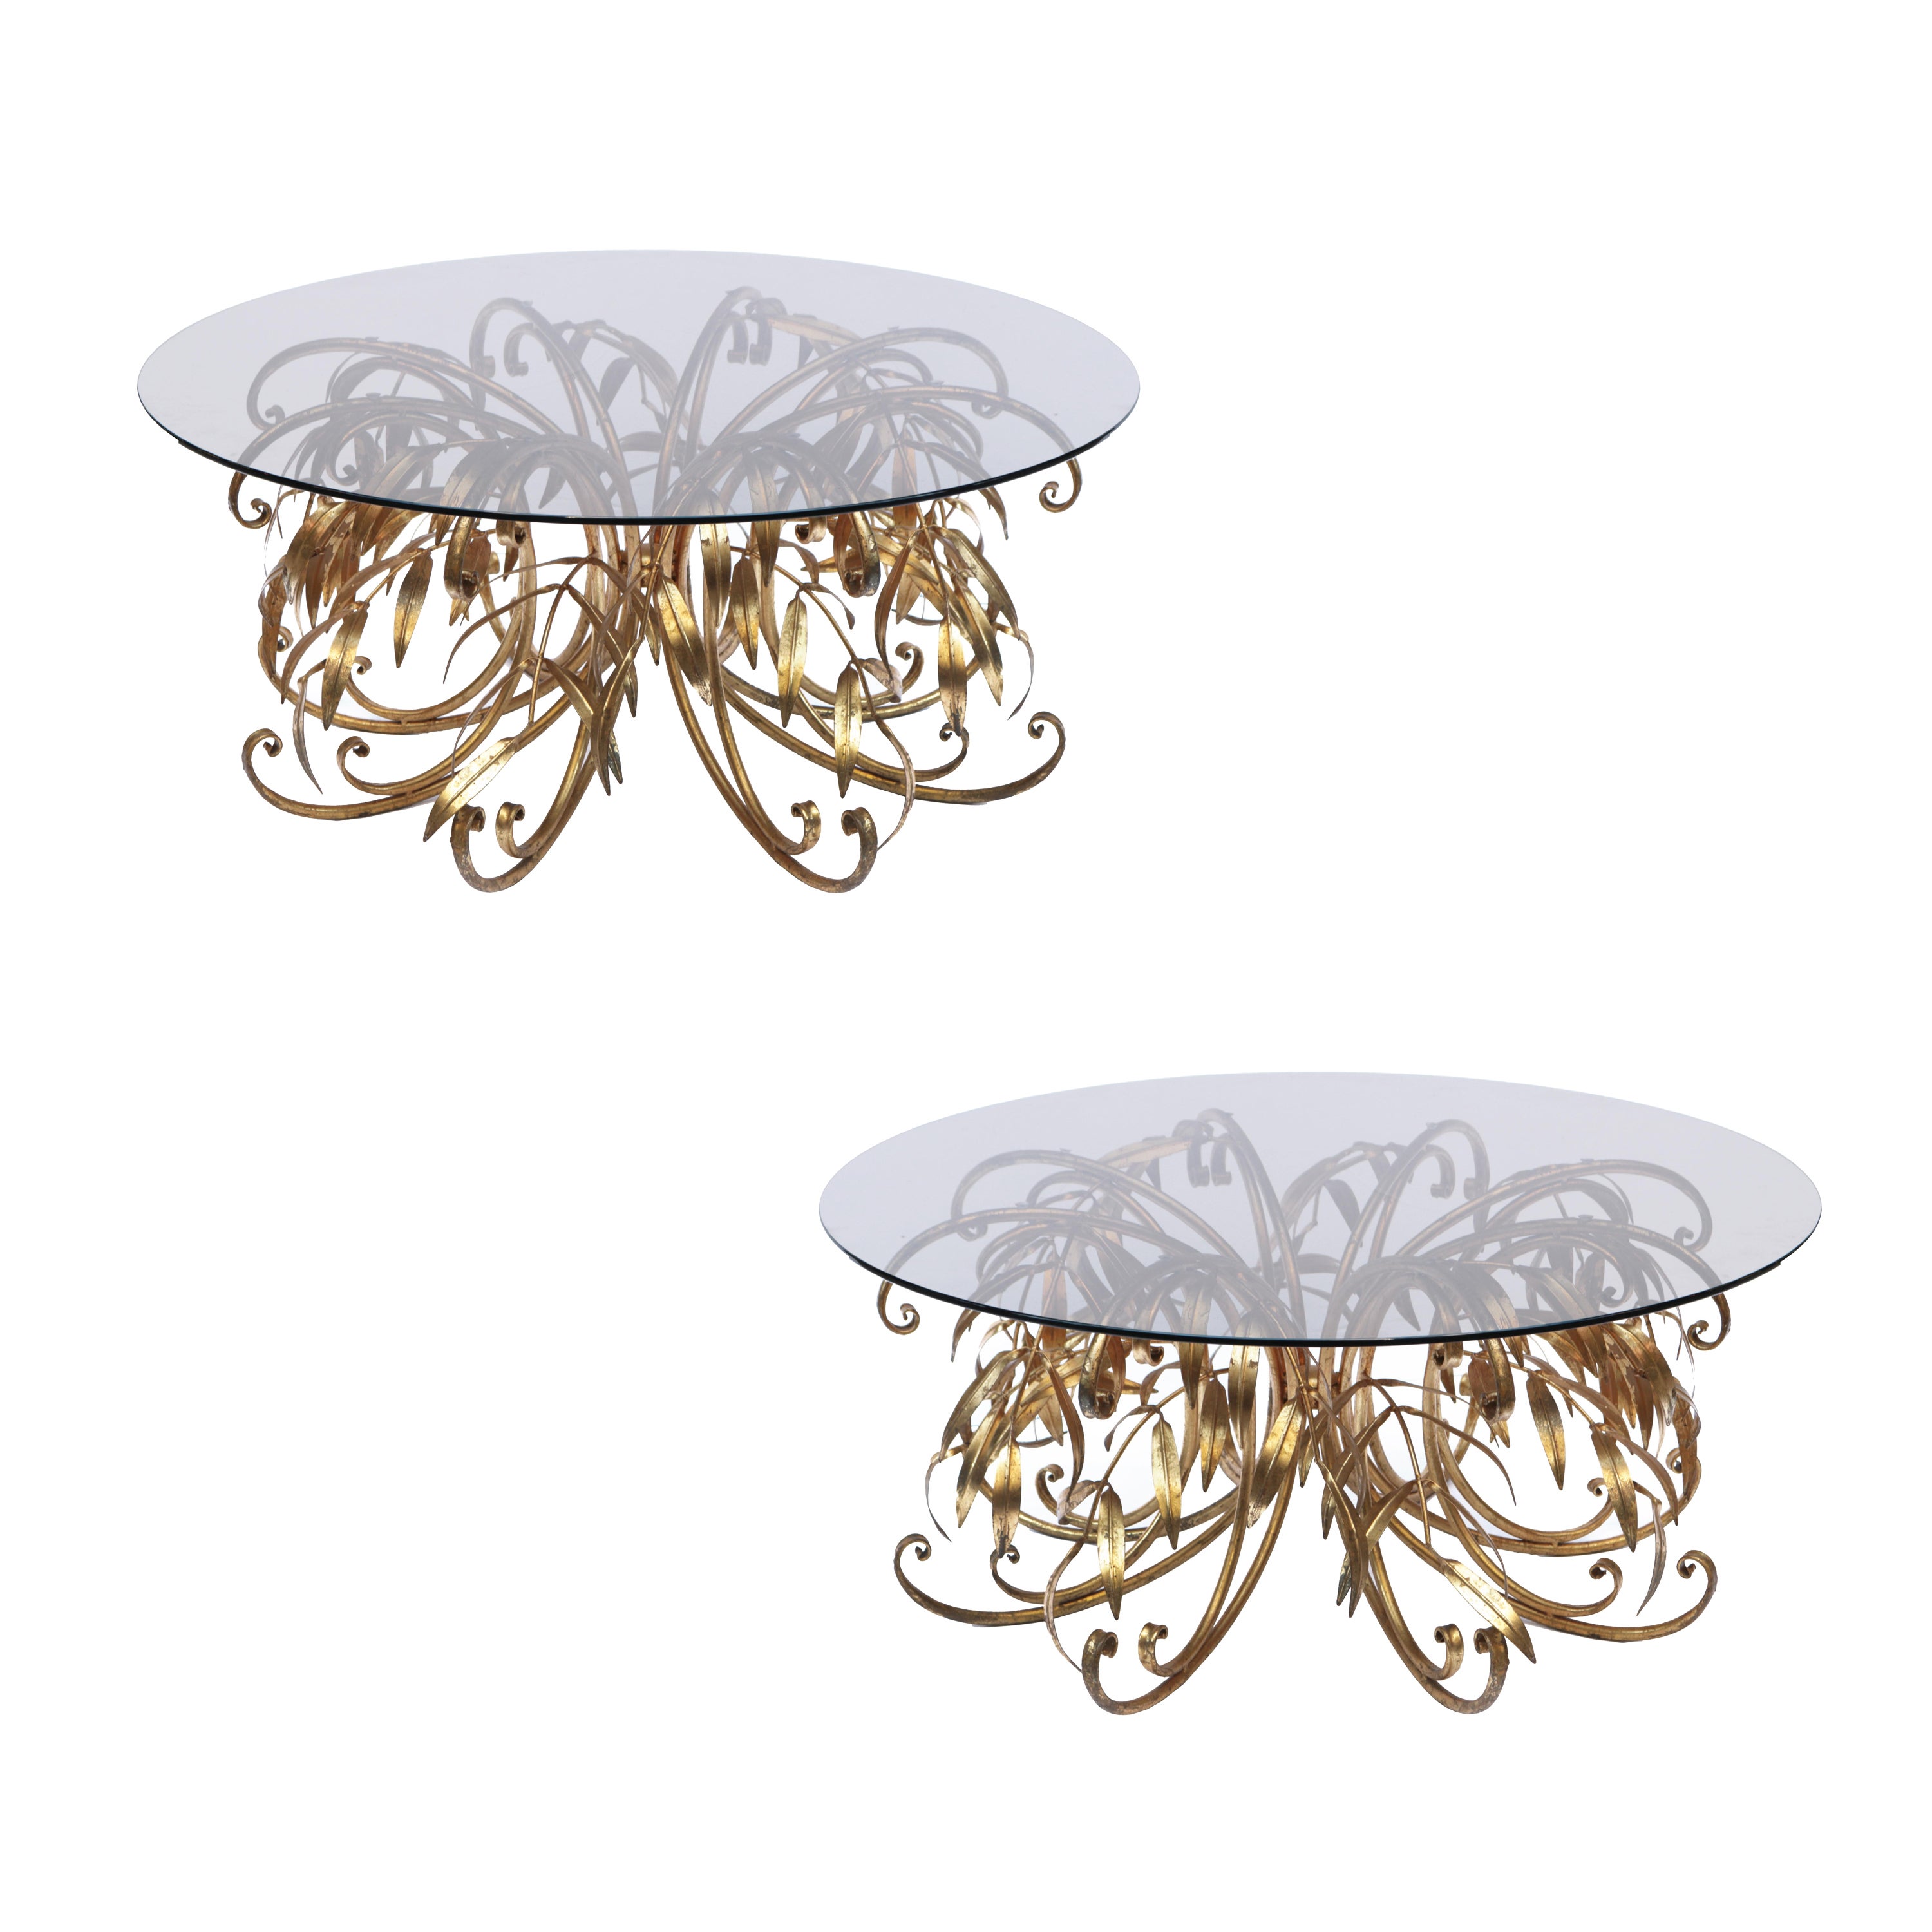 Pair of Modernist Sculptural Foliage Tables